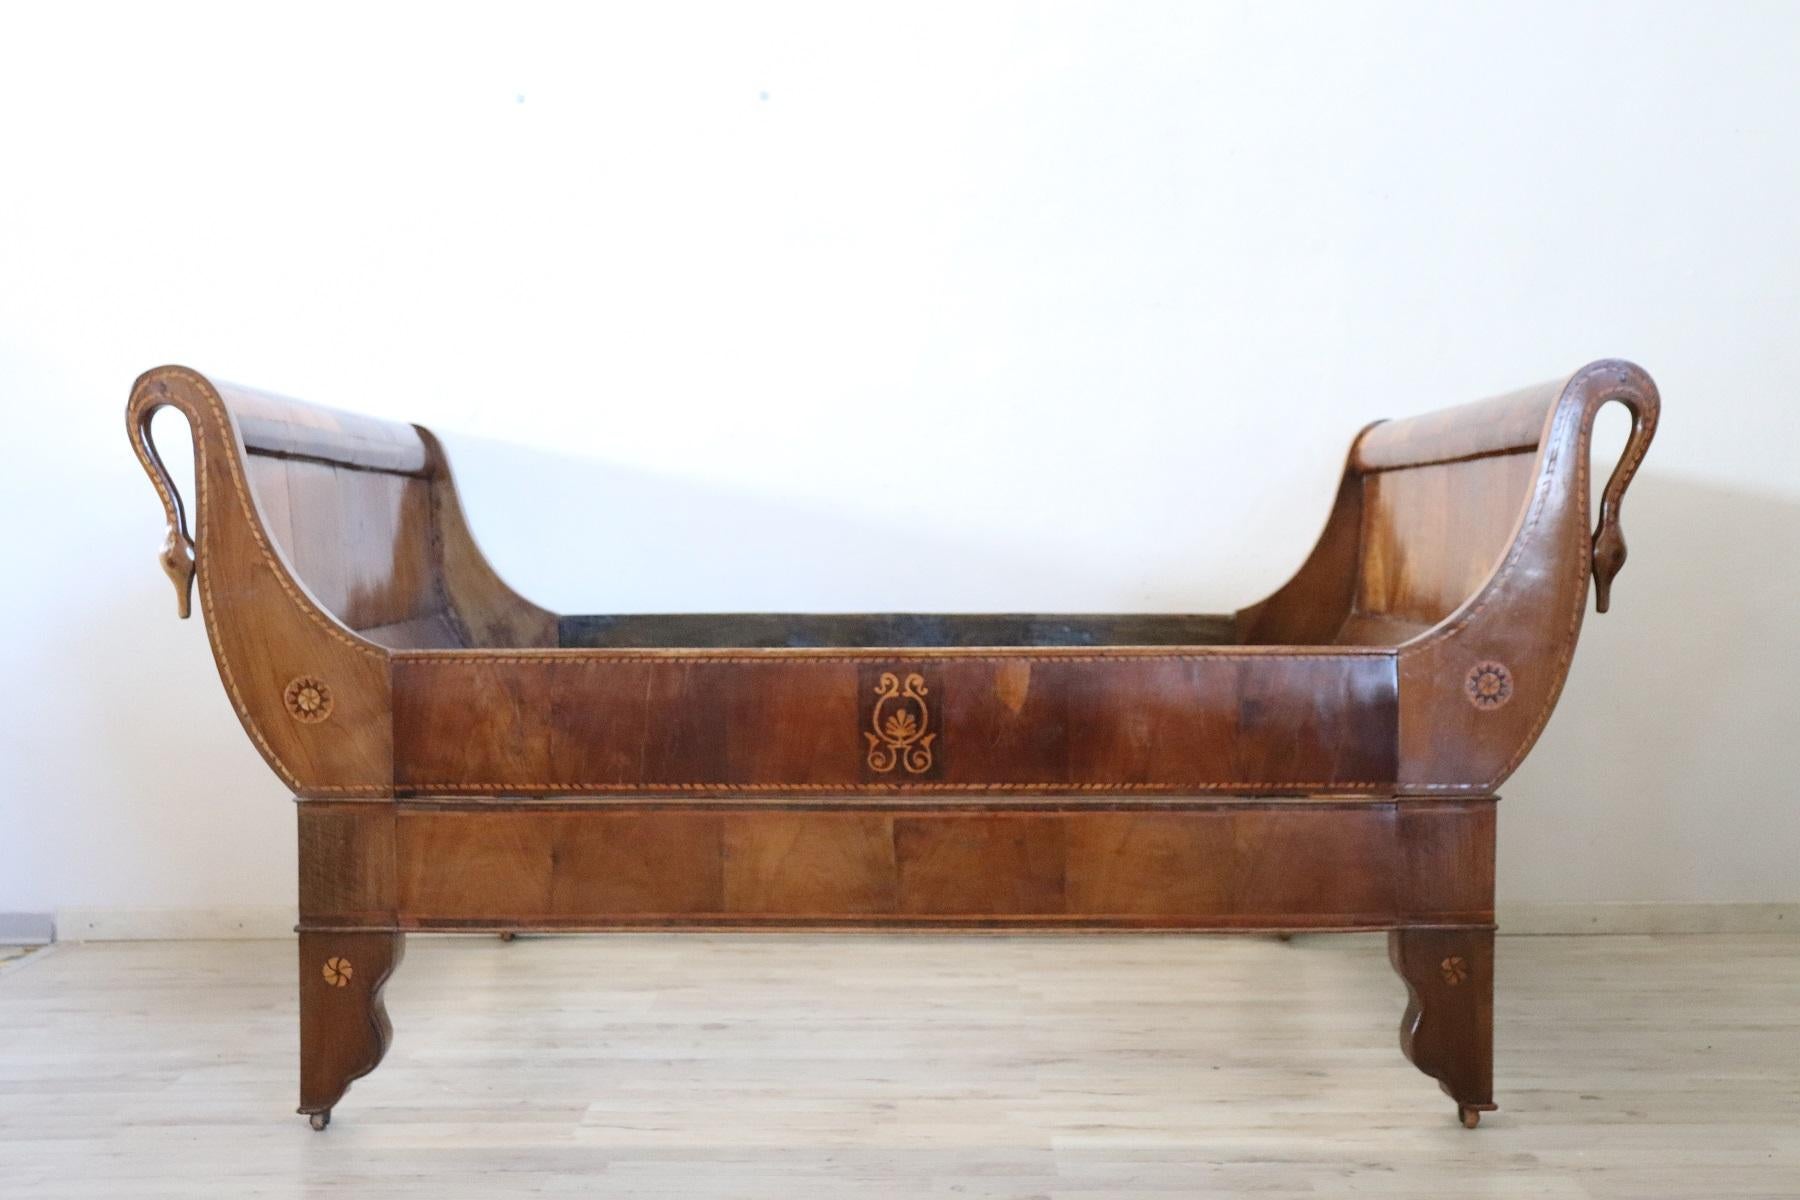 Rare Italian of the period Charels X antique bed, 1825s. This type of bed is called 